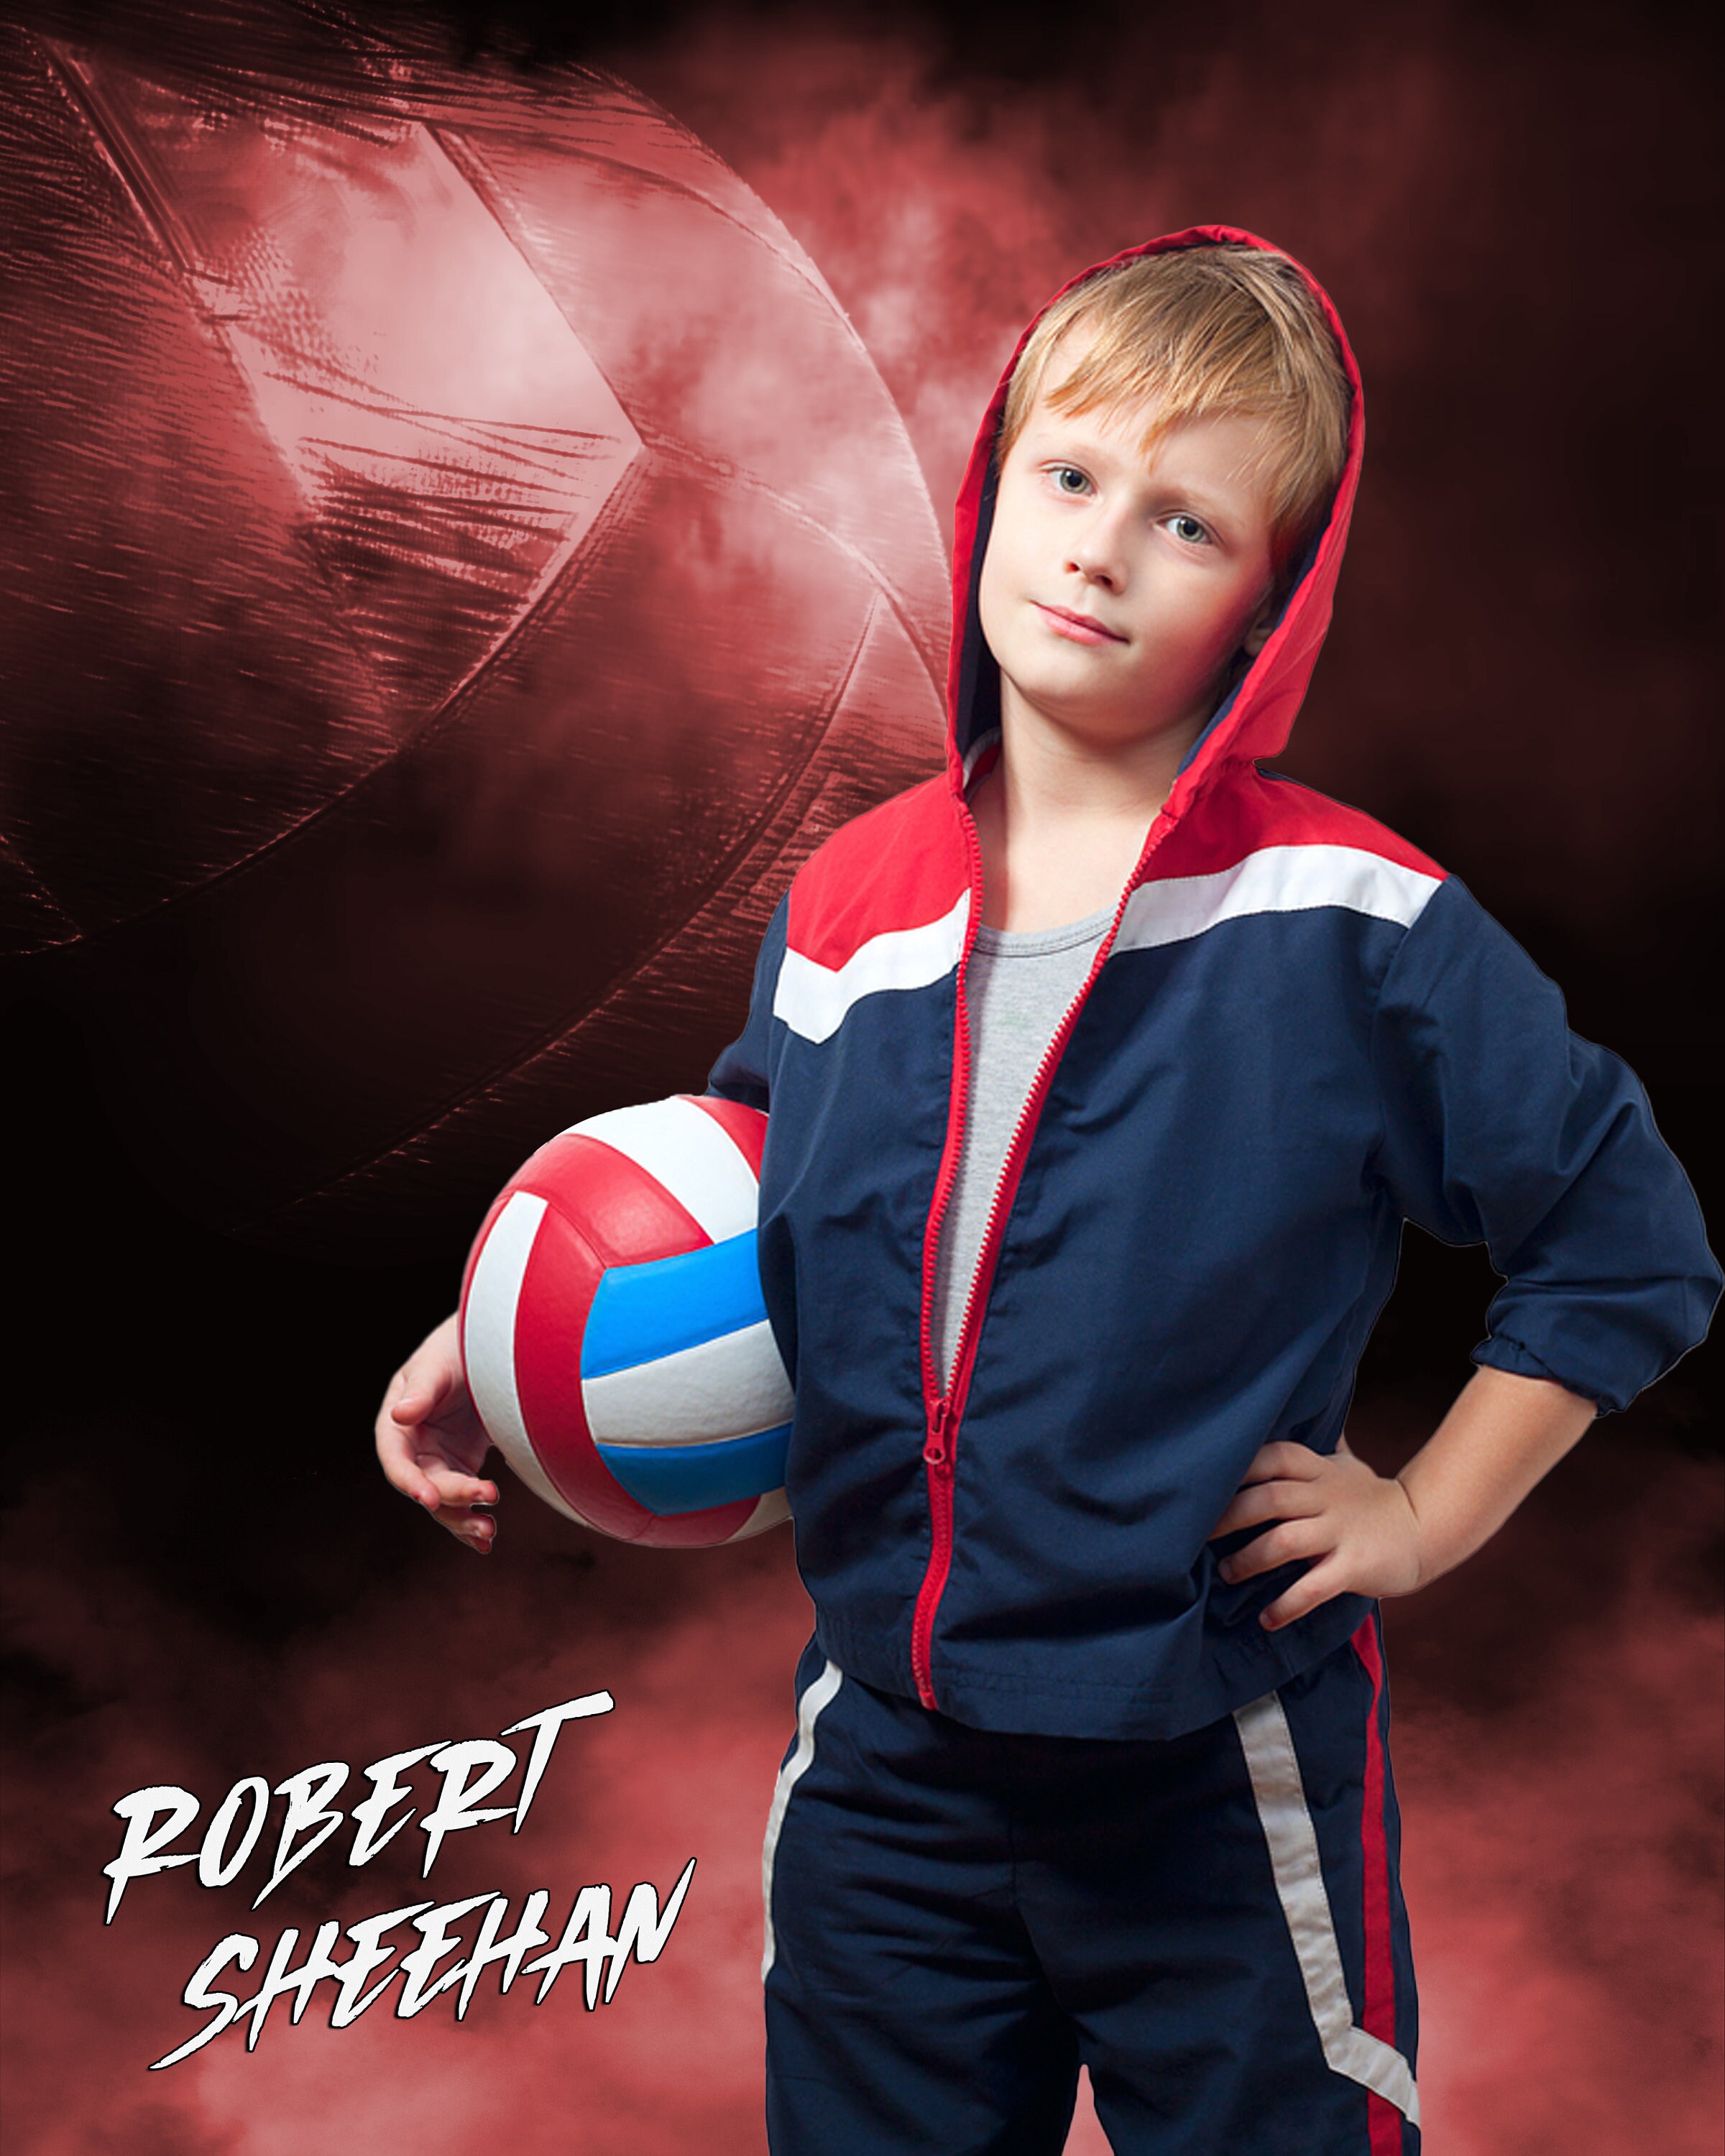 DORCEV 10x8ft Volleyball MatchBackdrop Sports Theme Birthday Party  Photography Background Volleyball Sports School Game Volleyball Club Banner  Wallpaper Boys Kids Adults Portrats Phoyo Studio Props : Electrónica 